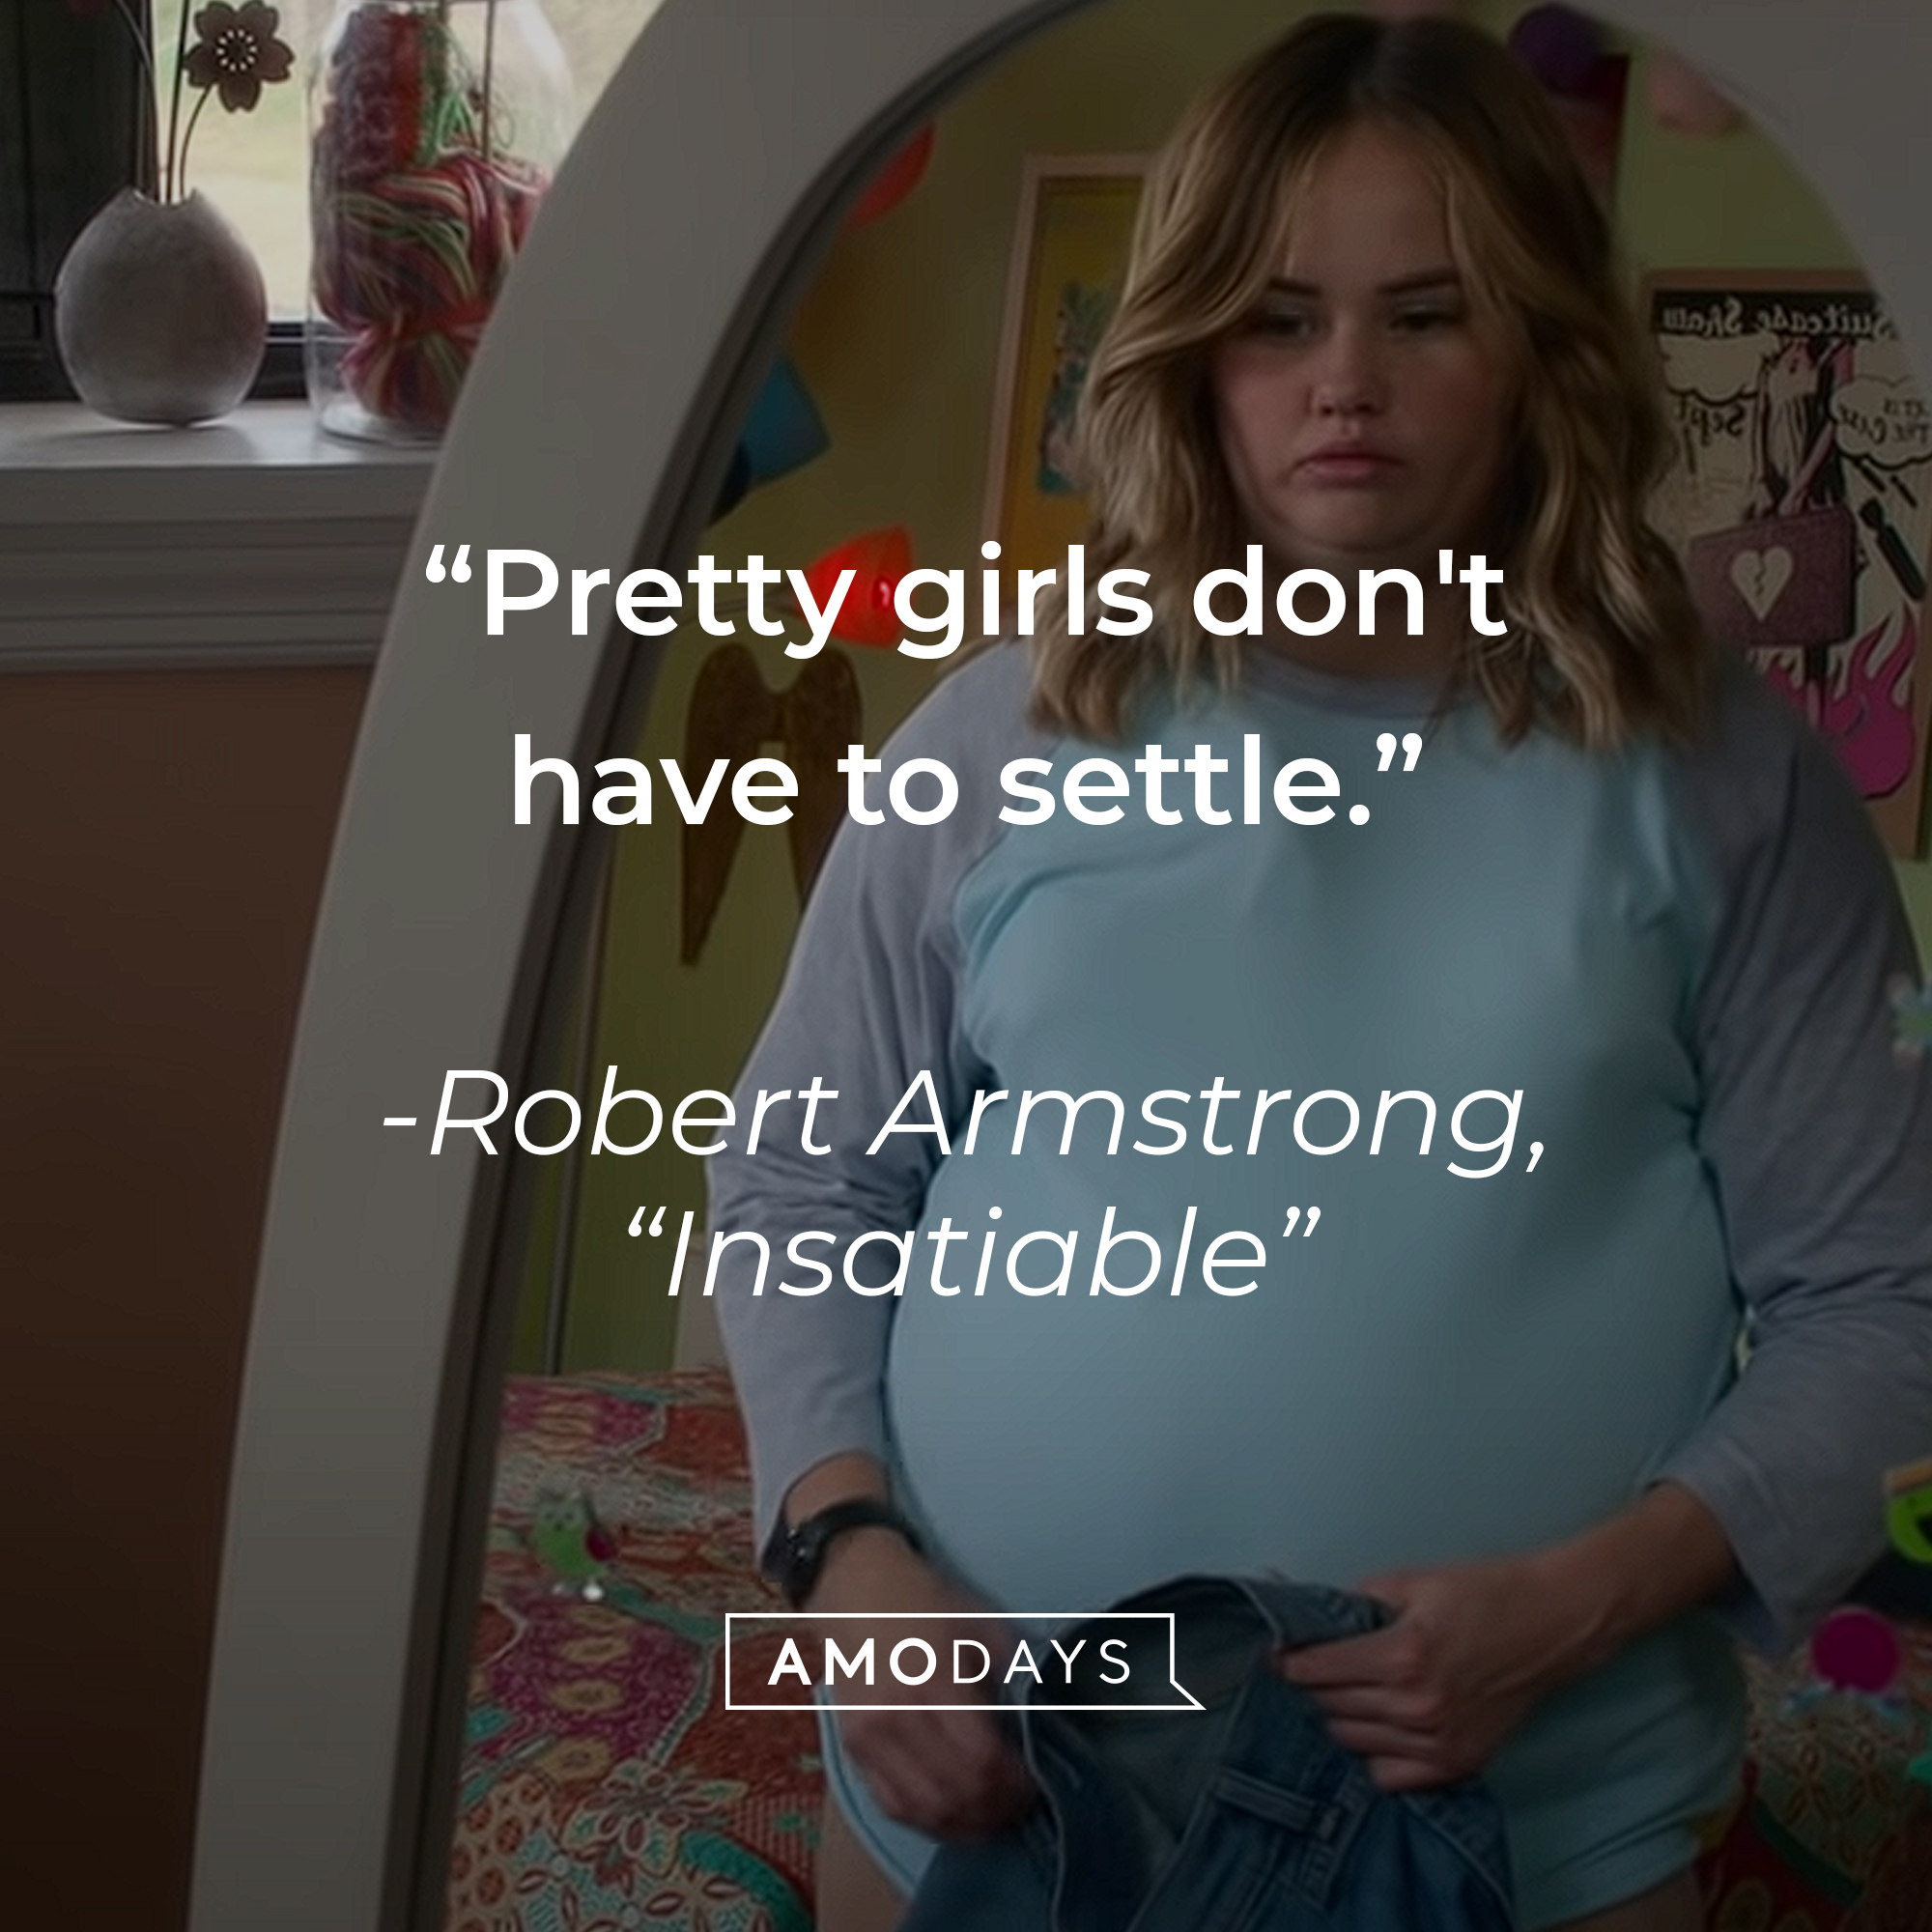 Patty Bladell with Robert Armstrong's quote on "Insatiable:" “Pretty girls don't have to settle." | Source: Youtube.com/Netflix